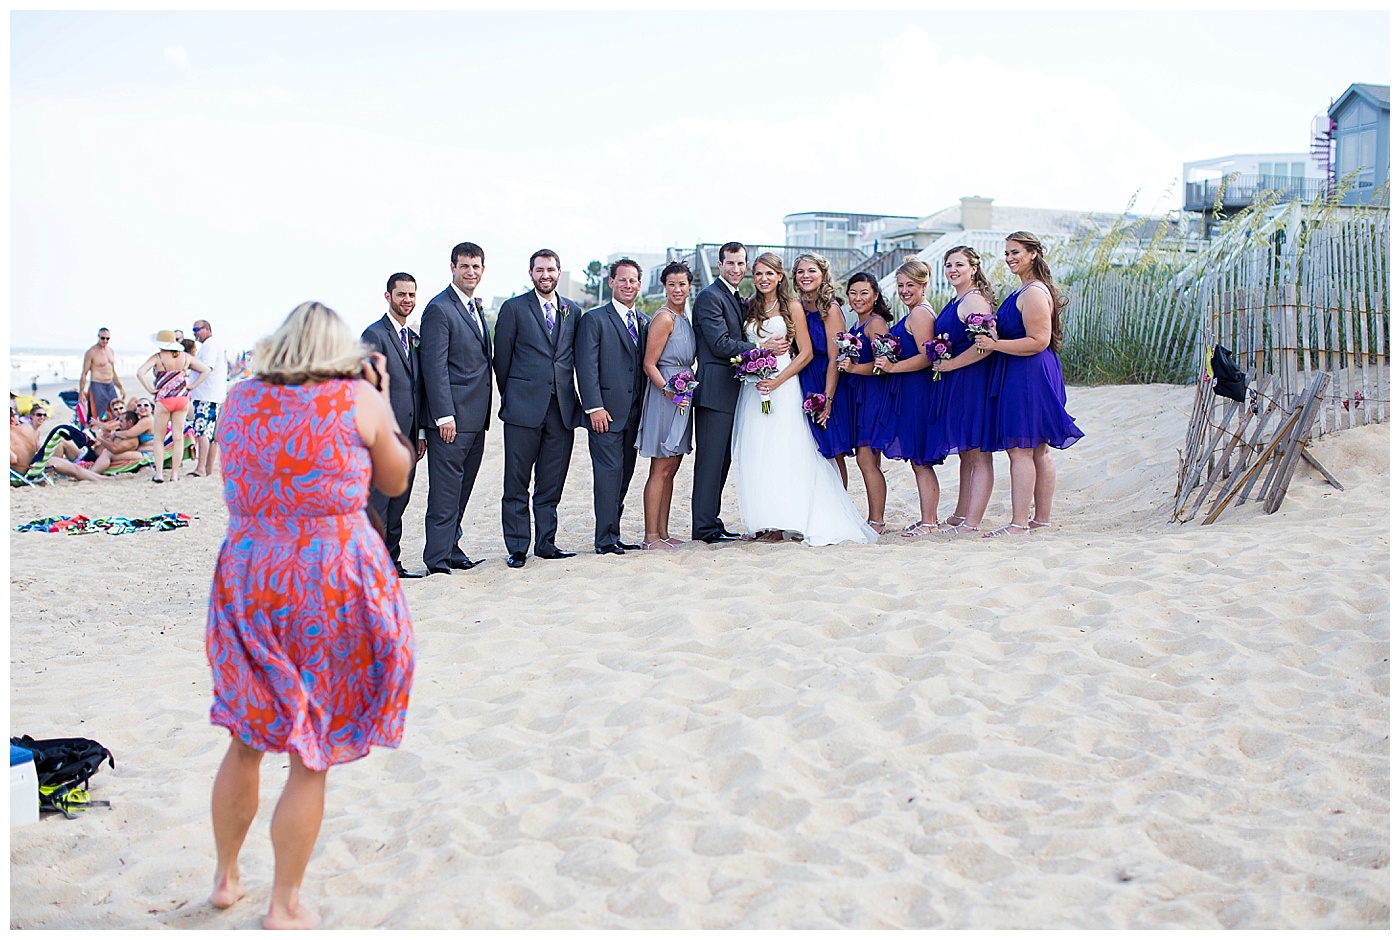 Behind the scenes at Leigh Skaggs Photography 2015 weddings!